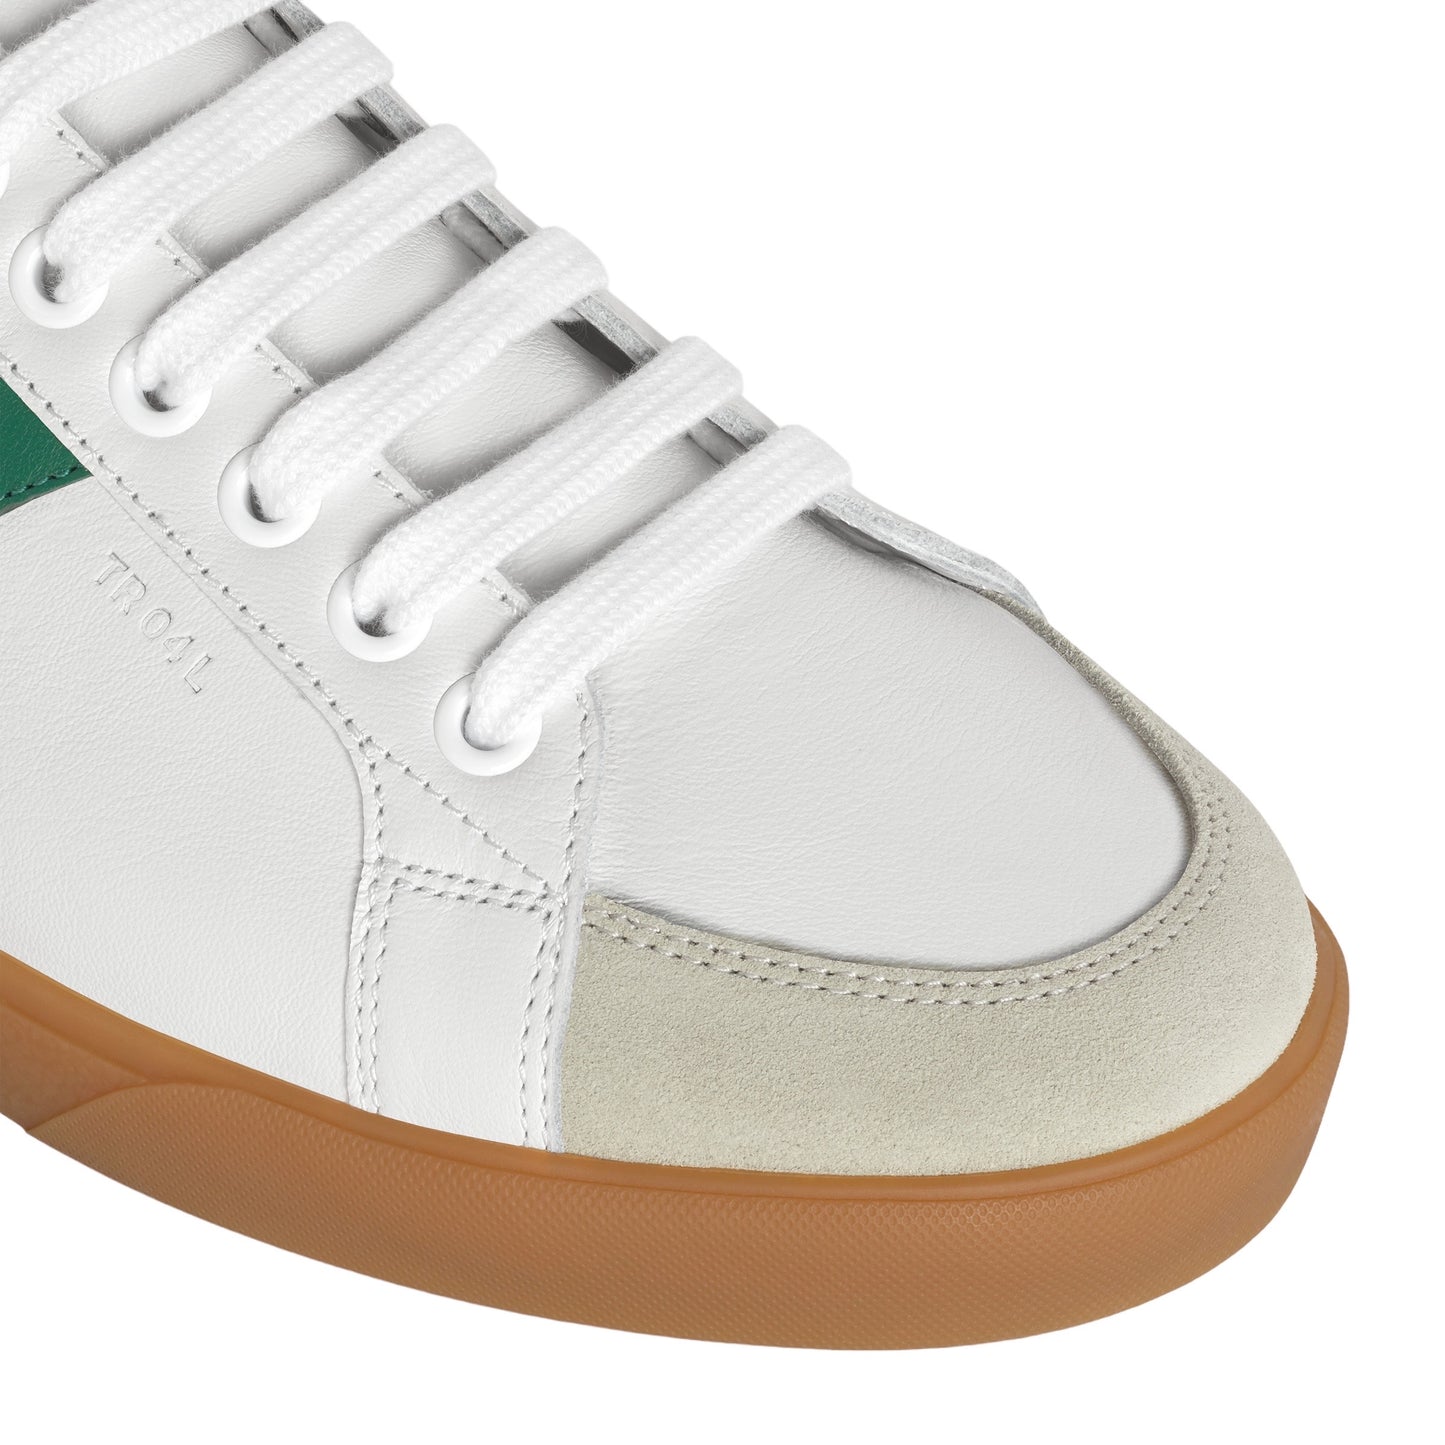 Celine Triomphe Lace-Up Sneakers